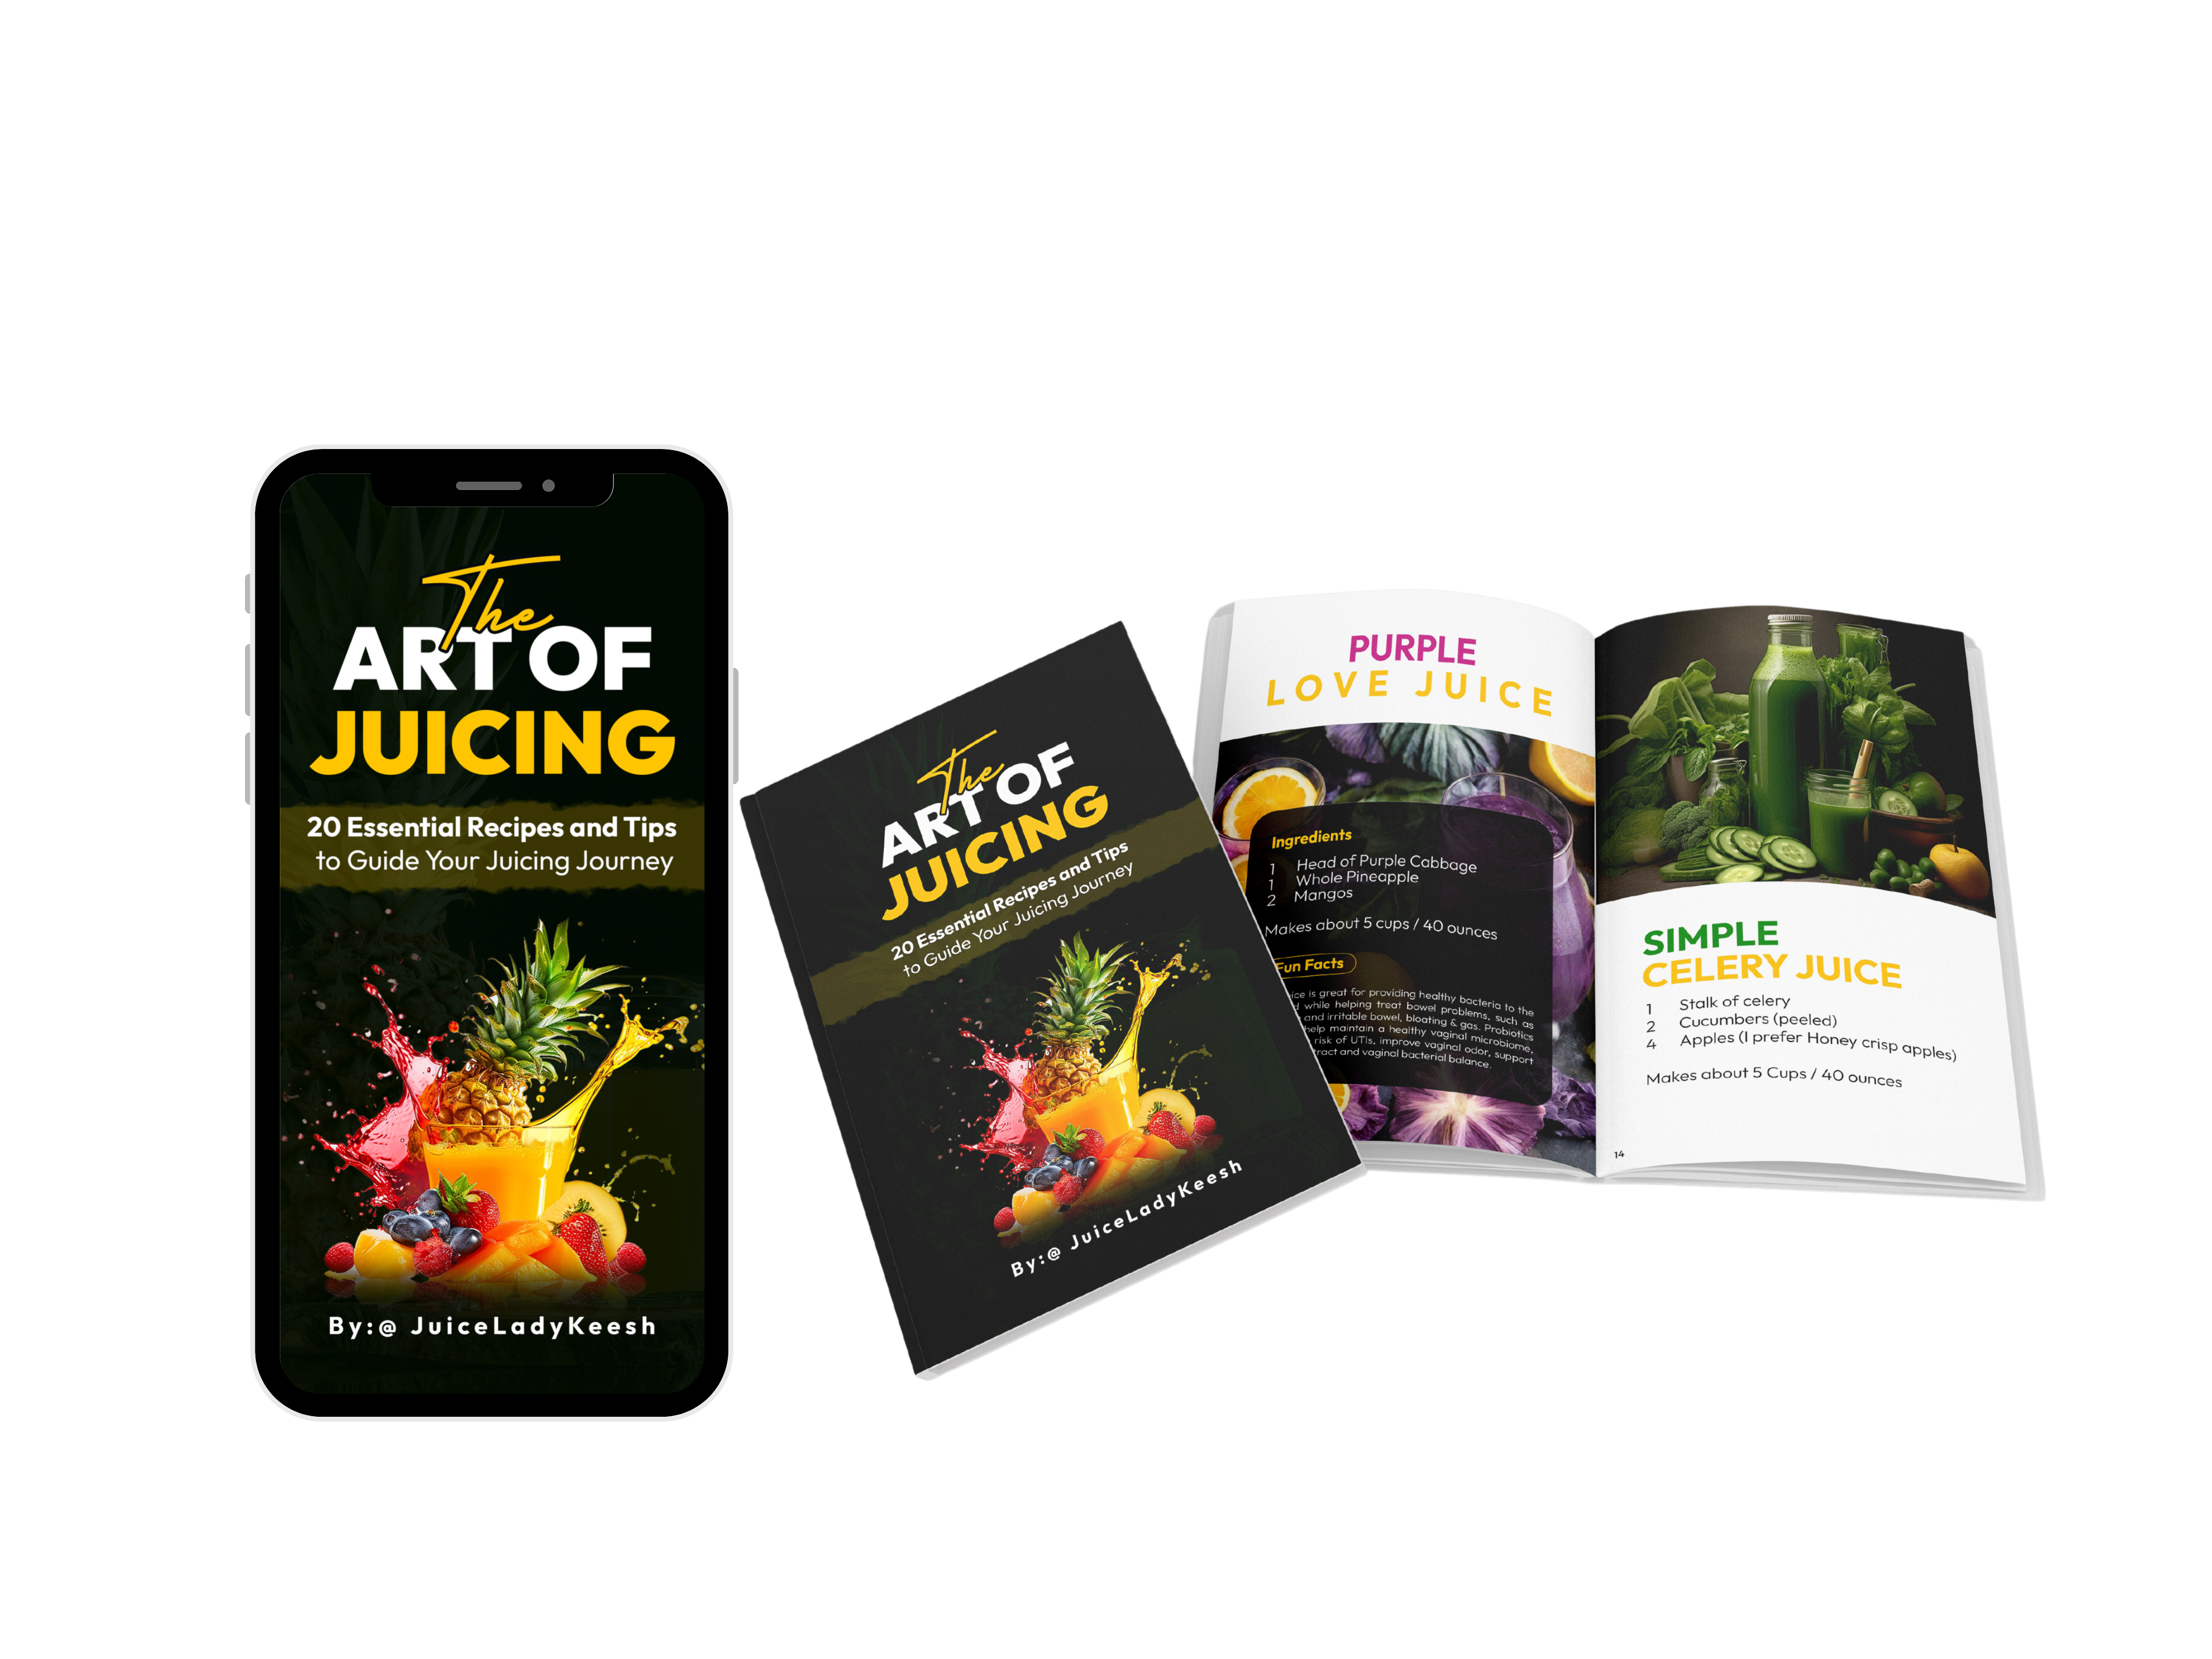 The Art of Juicing:20 Essential Recipes and Tips to Start Your Juicing Journey